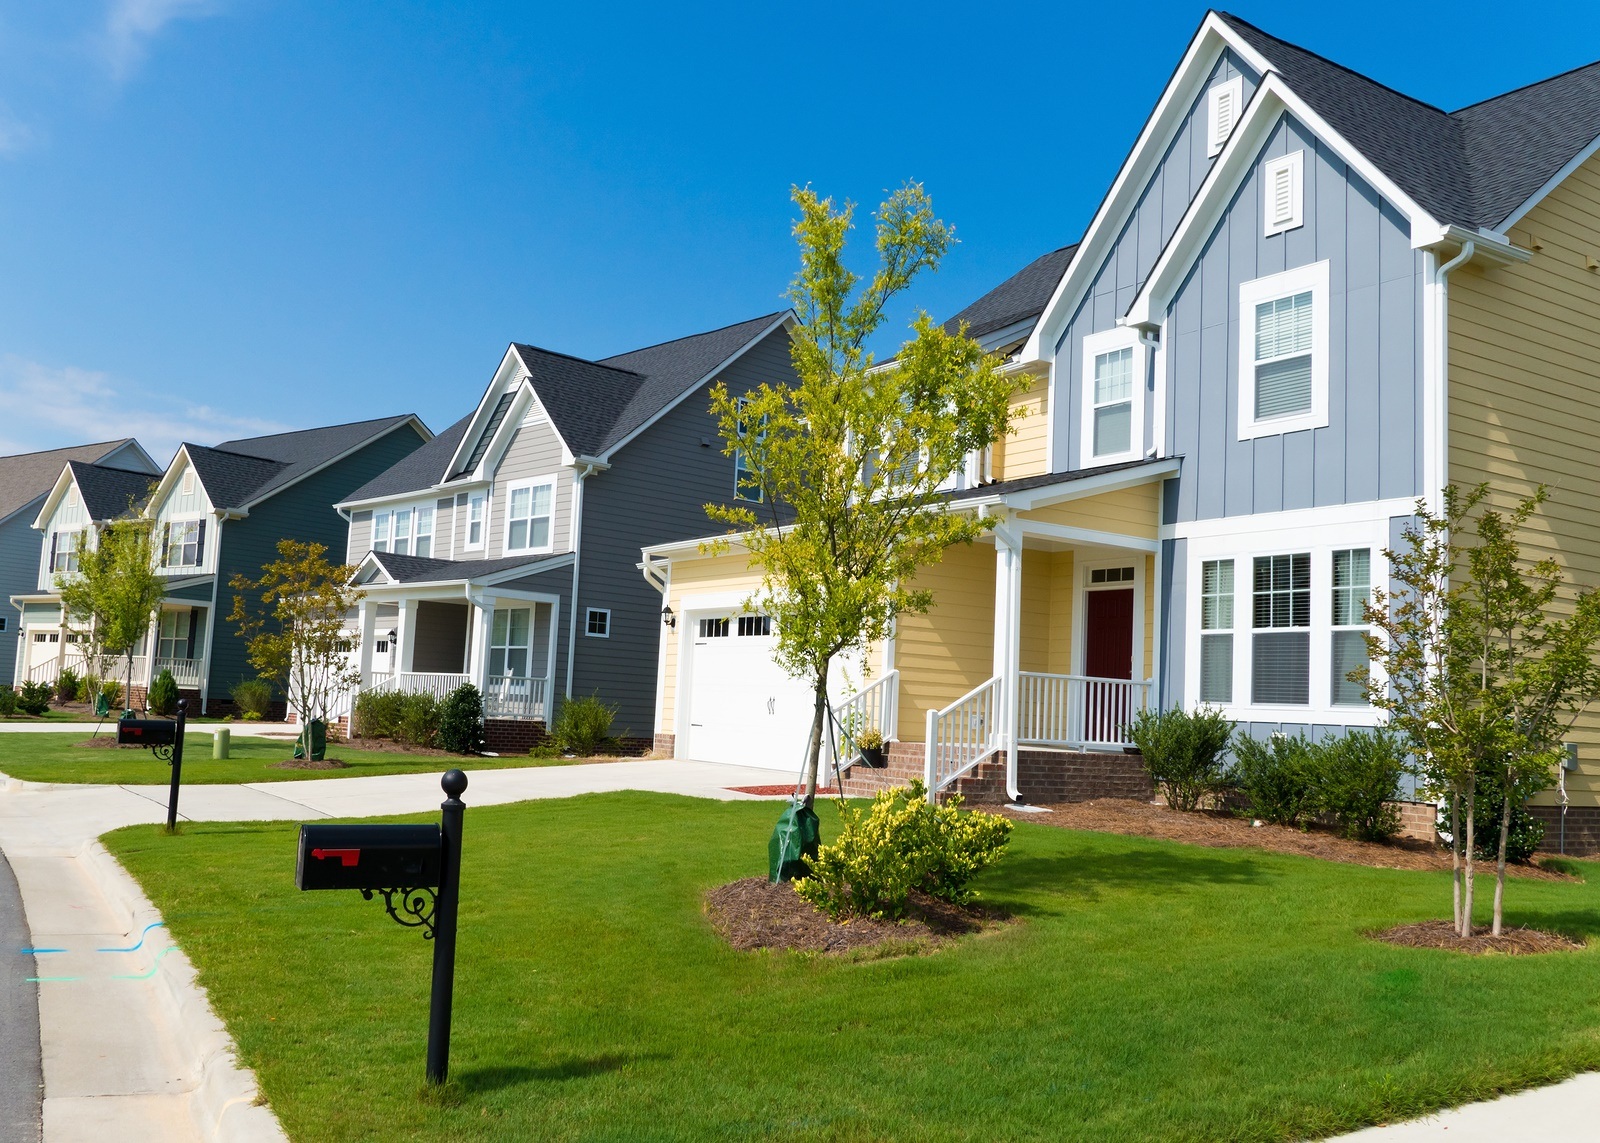 Hiring an HOA Management Company for Managing your Residential Community